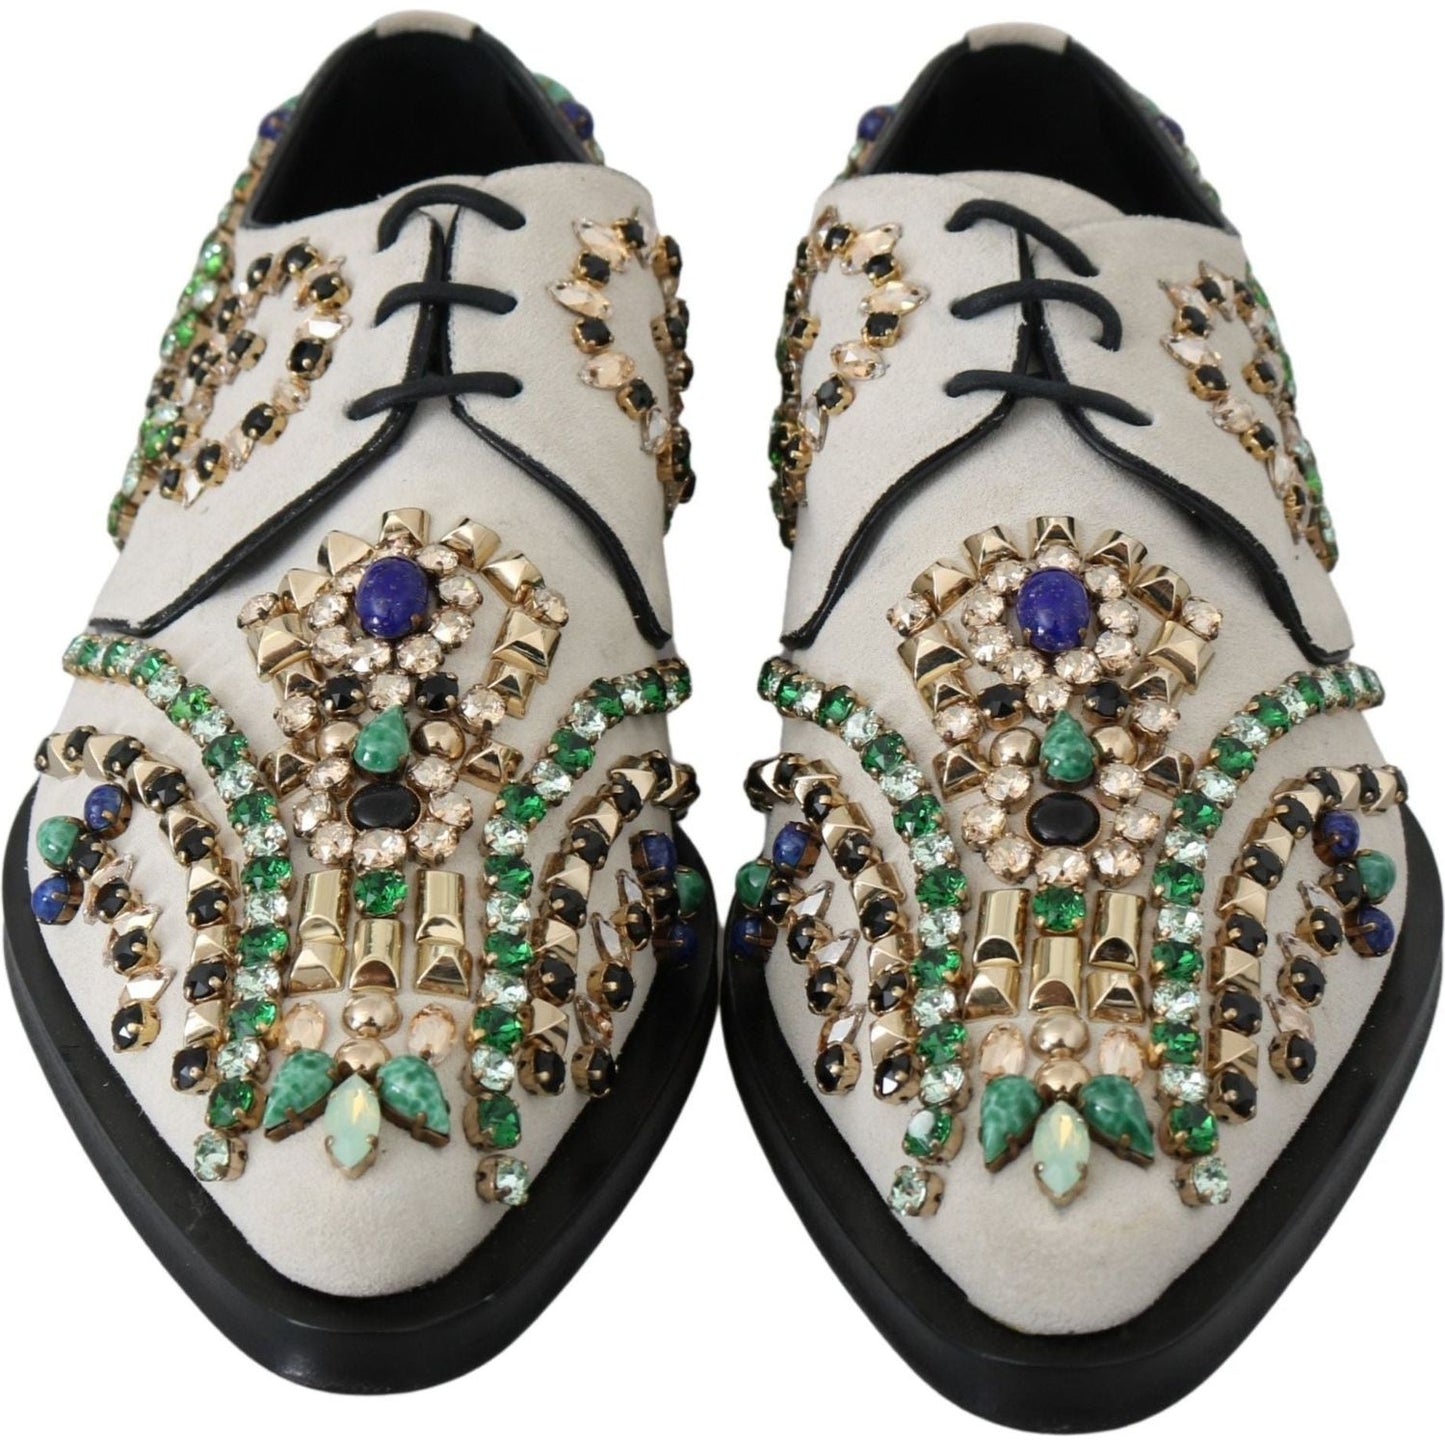 Dolce & Gabbana Elegant White Suede Dress Flats with Crystals white-suede-crystal-dress-broque-shoes